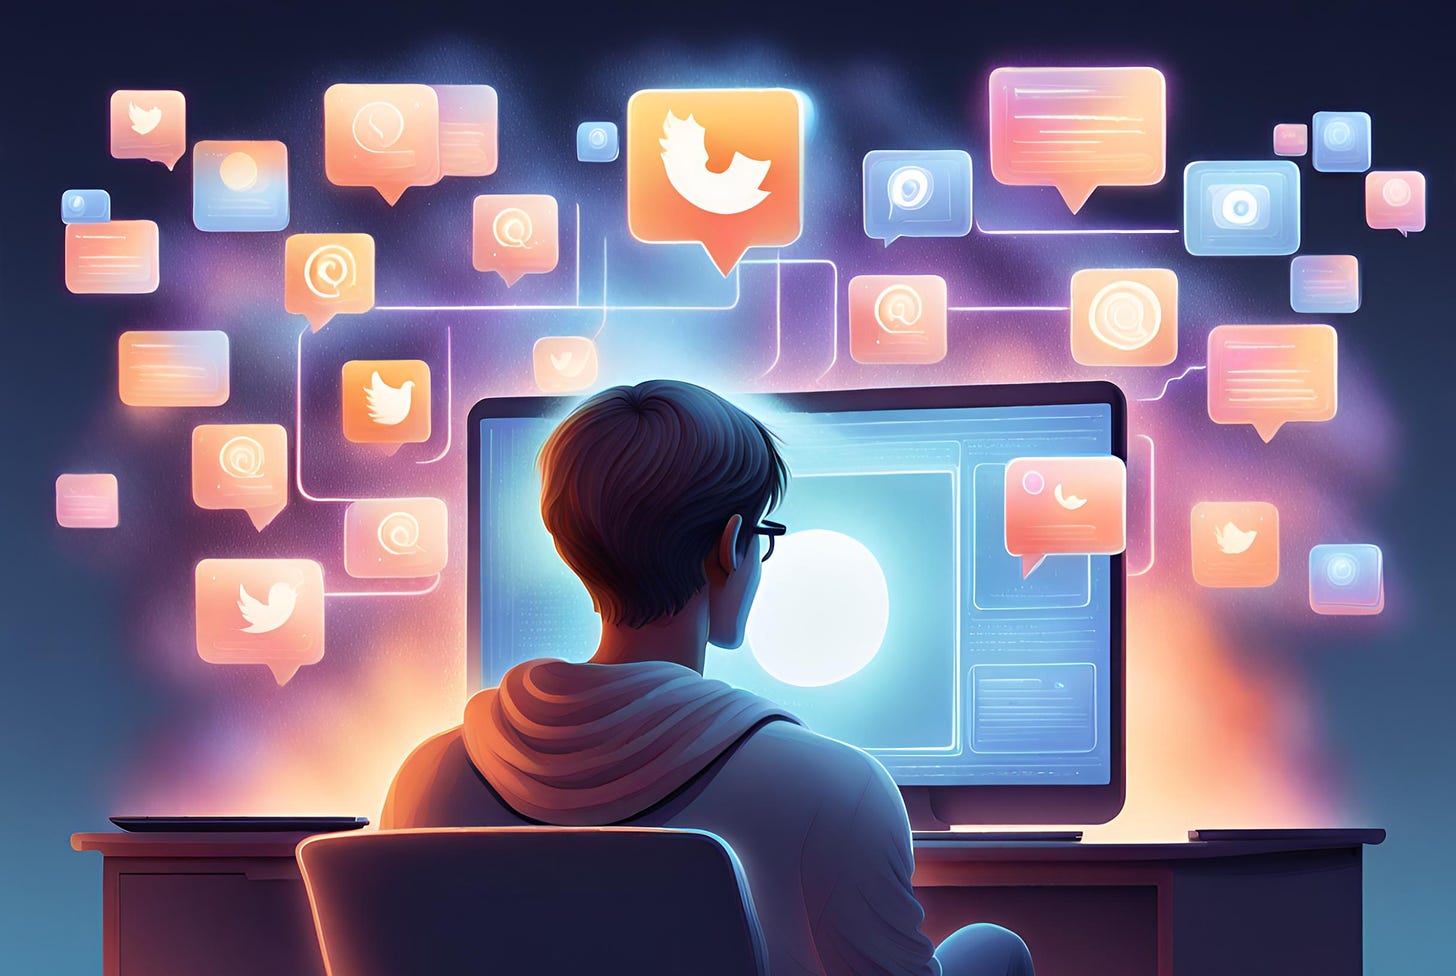 illustration of a person looking at a computer surrounded by social media notification icons